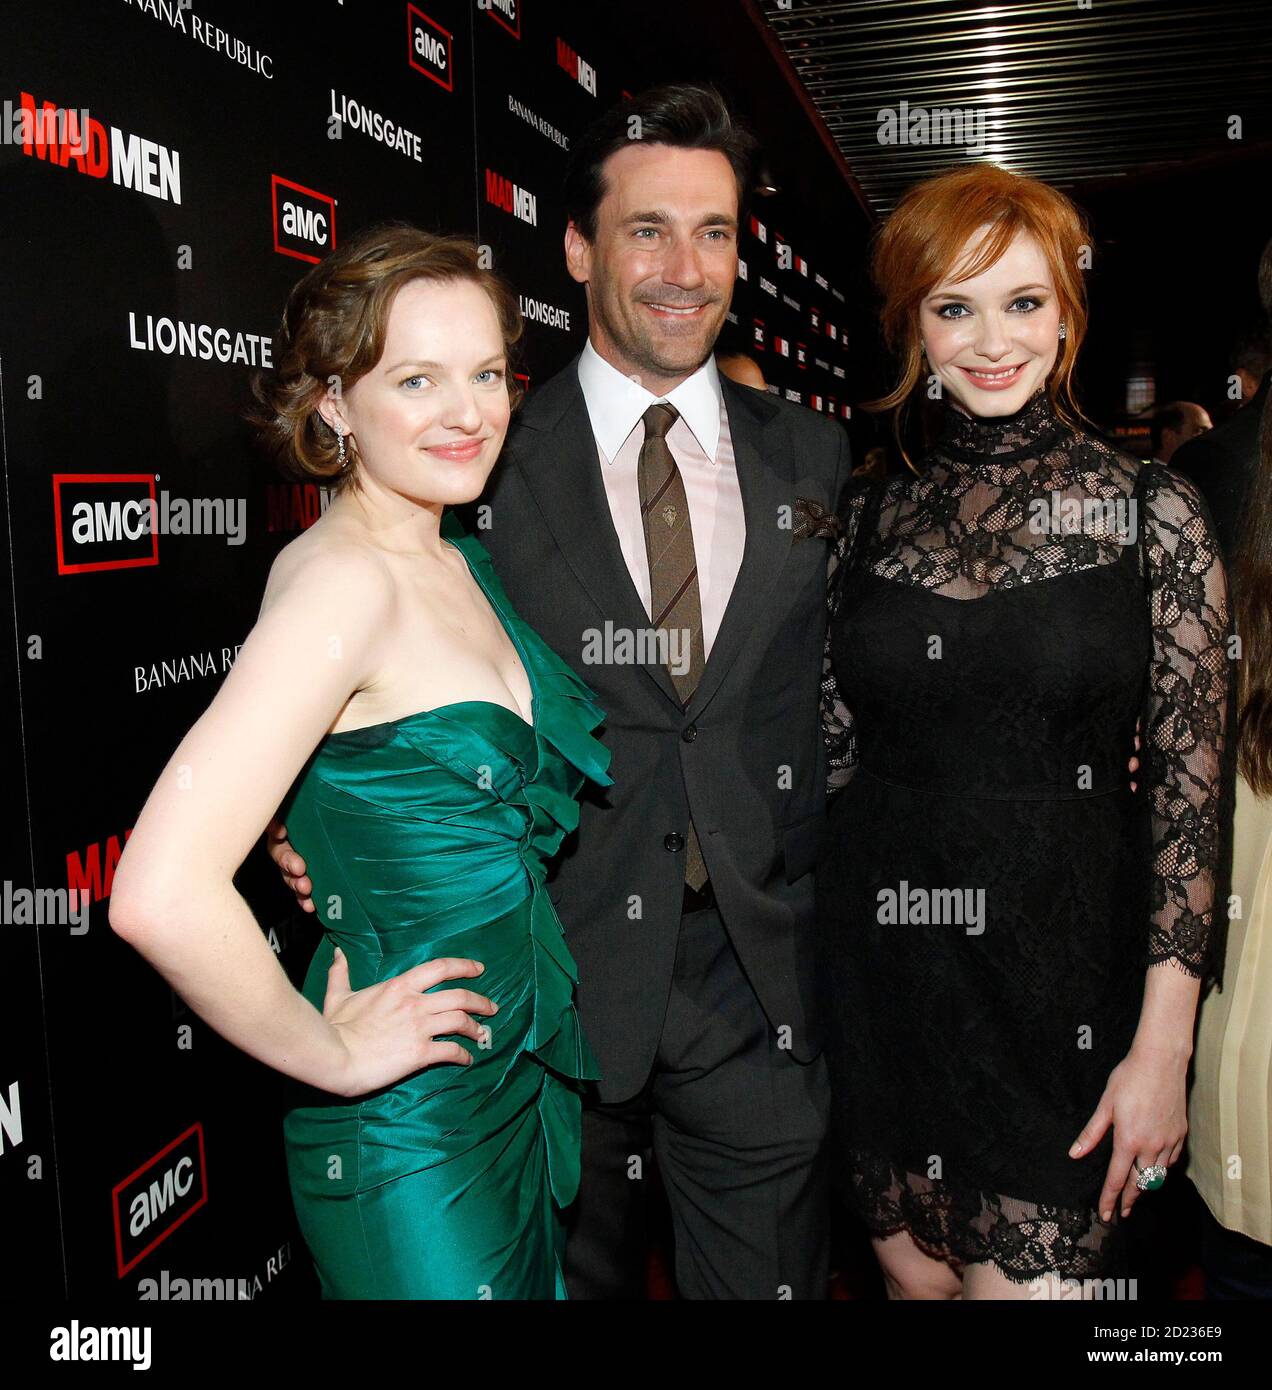 Cast member Jon Hamm (C) poses with co-stars Christina Hendricks (R) and  Elisabeth Moss at the premiere for the fourth season of the television  series "Mad Men" at the Mann 6 theatre